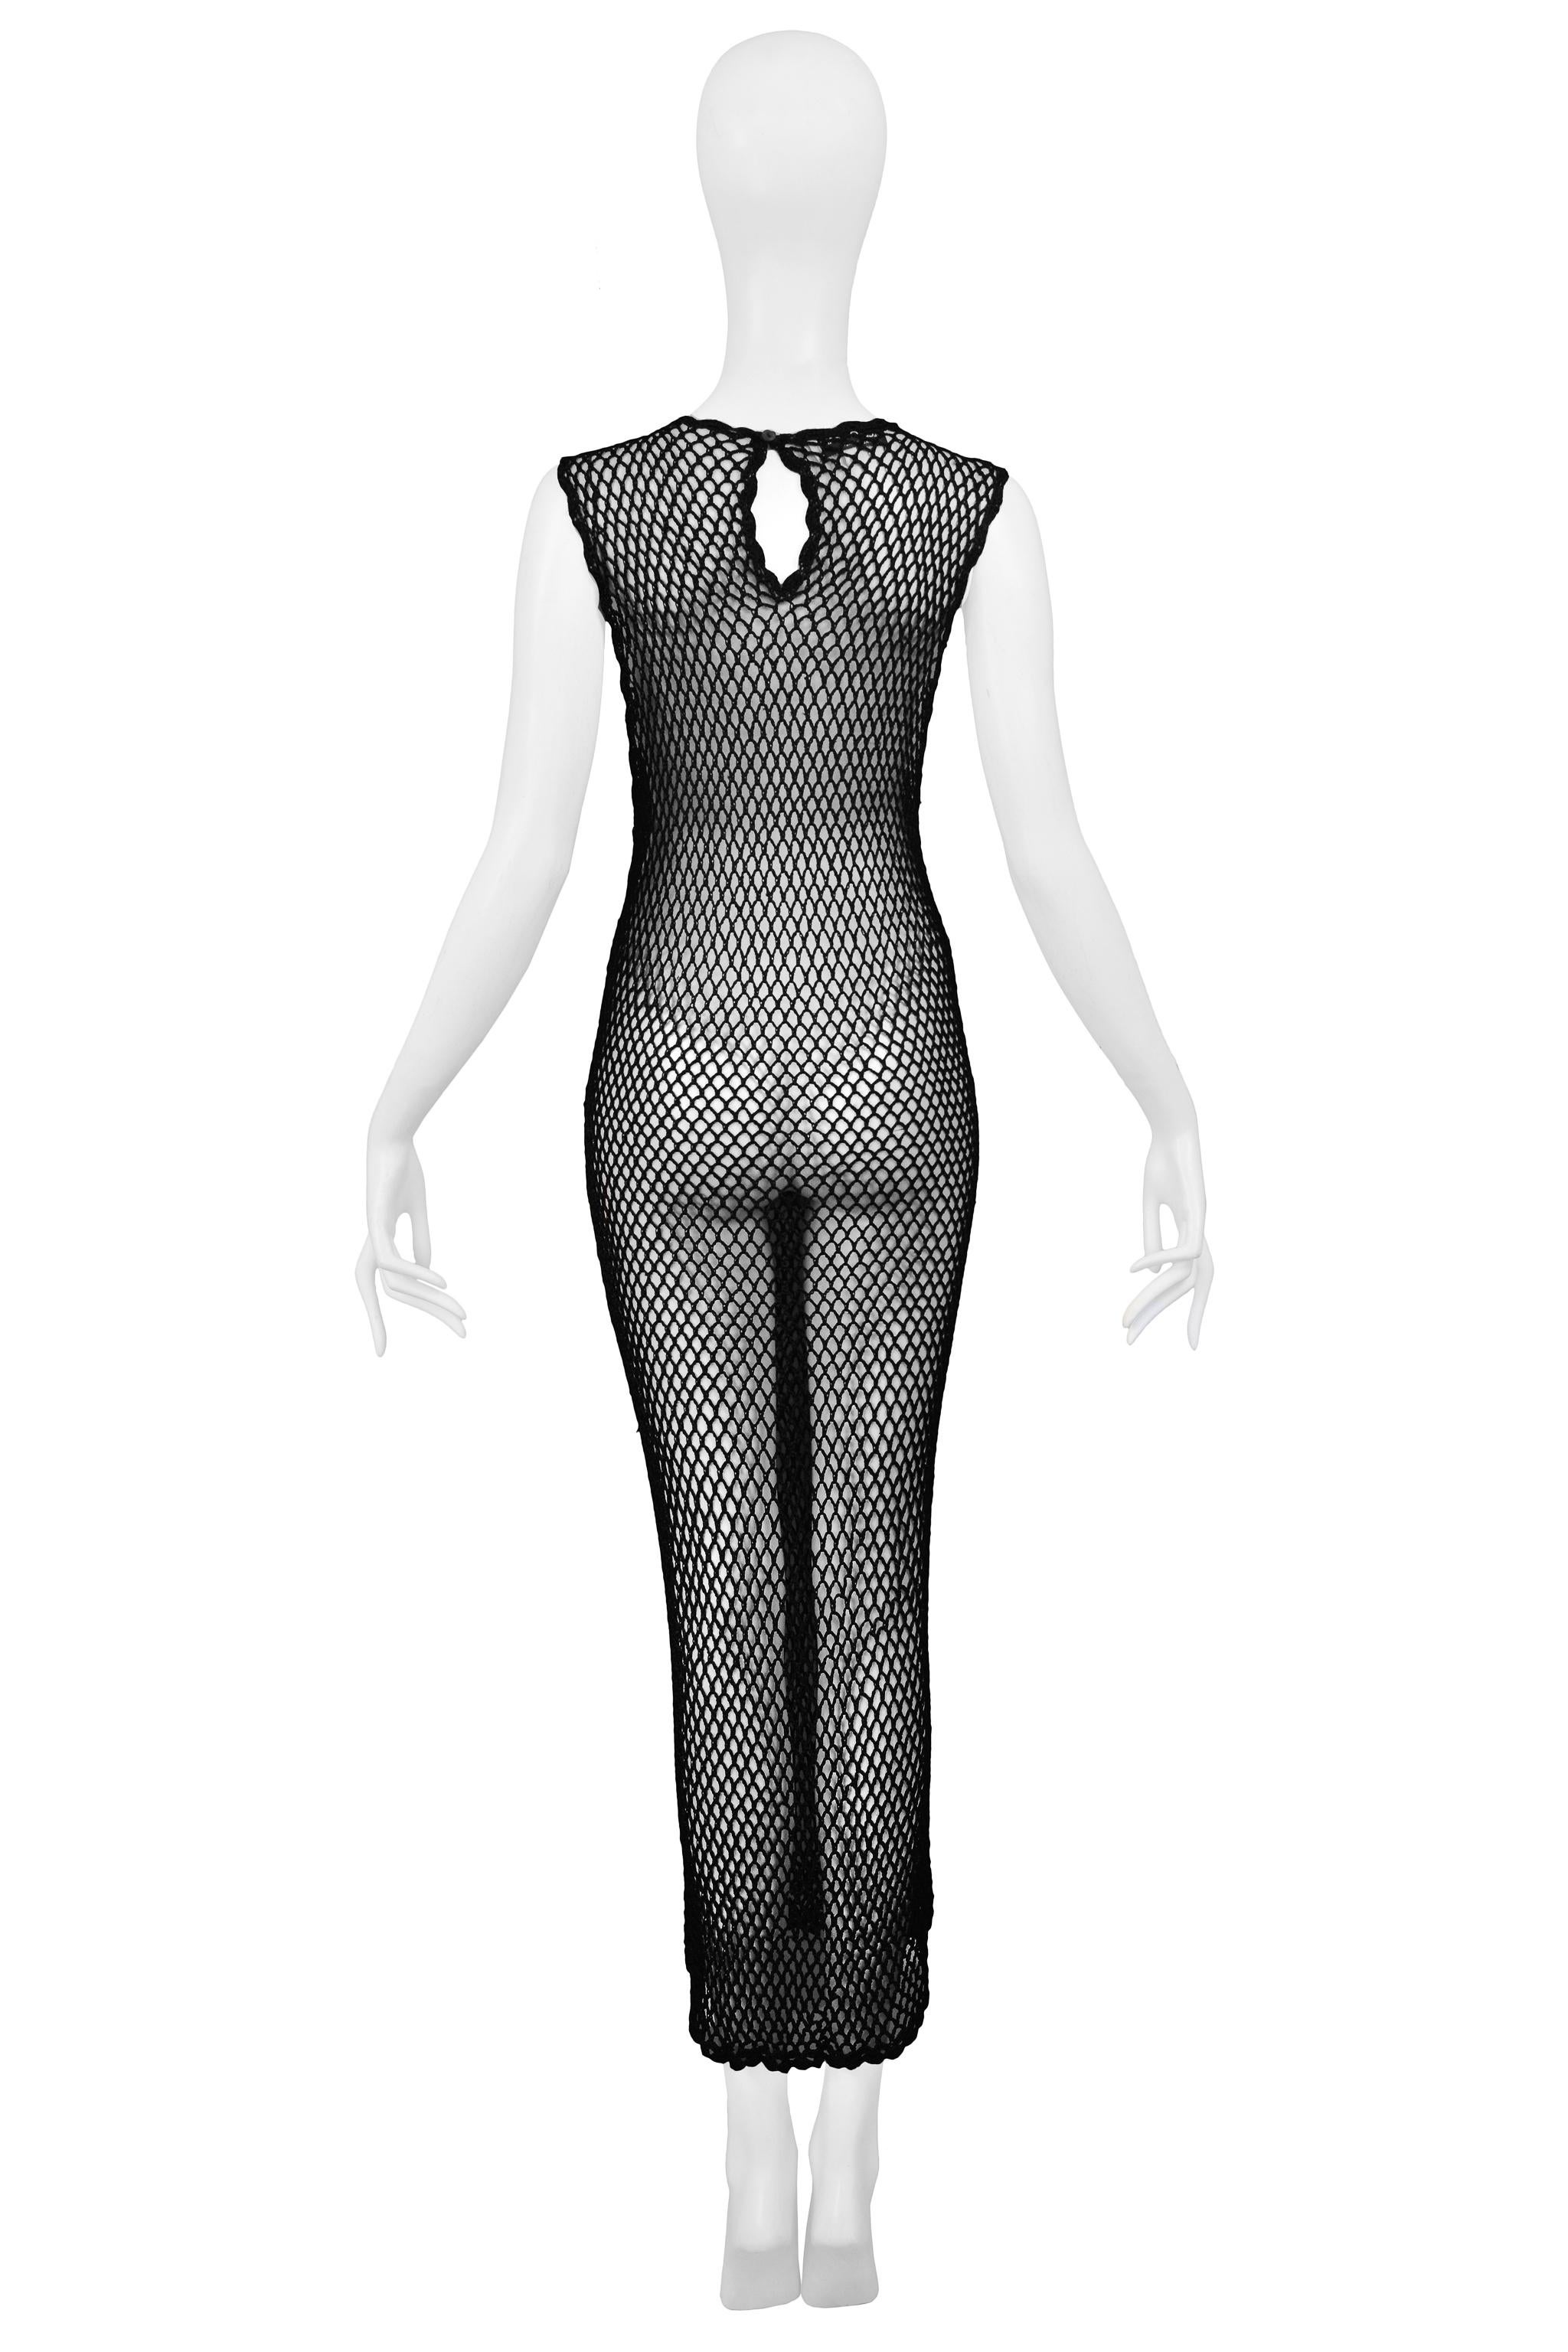 Iconic Dolce & Gabbana Black Knit Fishnet Dress 1995 In Excellent Condition In Los Angeles, CA